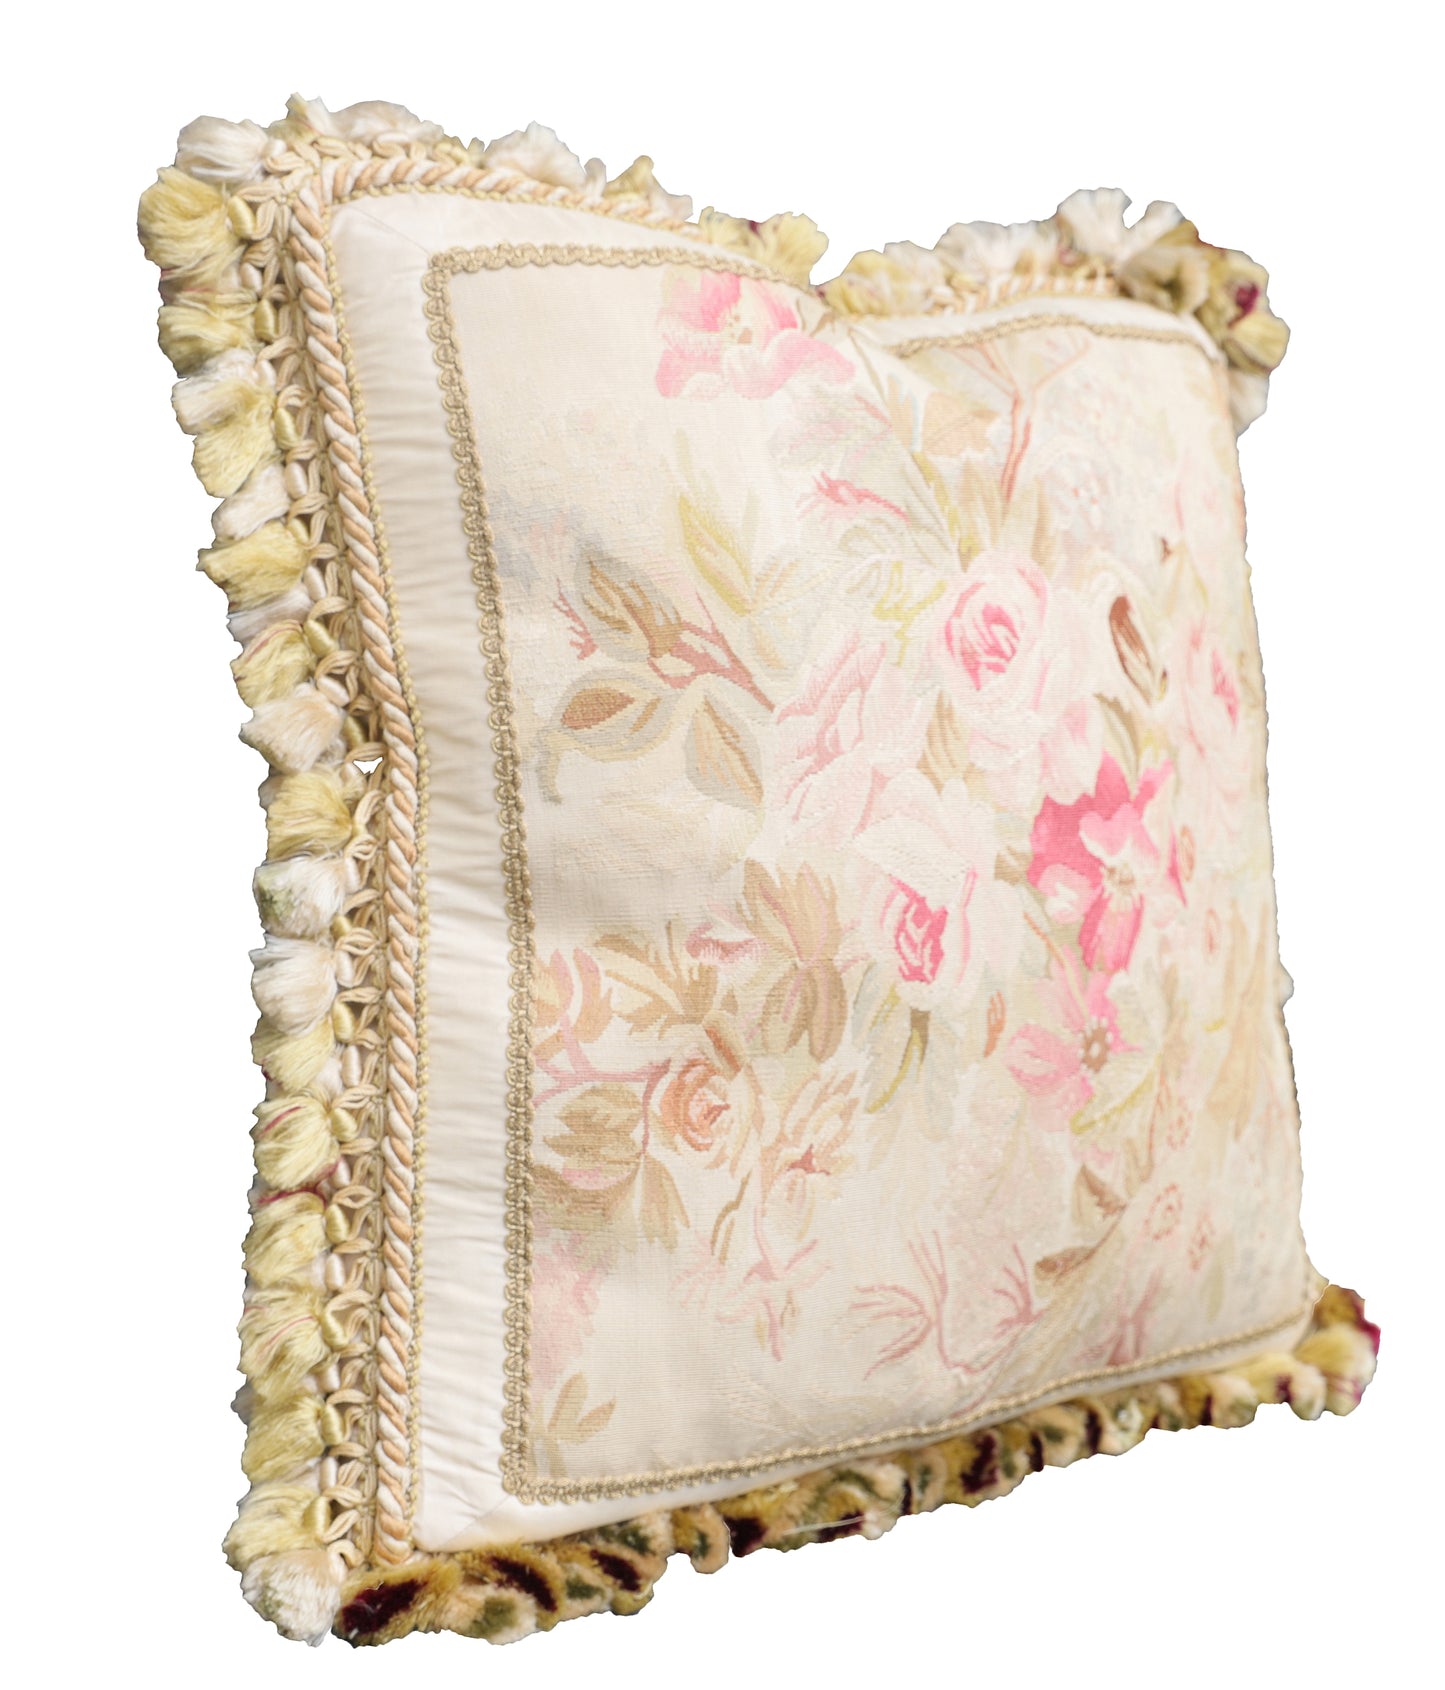 20"x20" Very Fine Quality Hand Woven Silk Aubusson Pillow Case